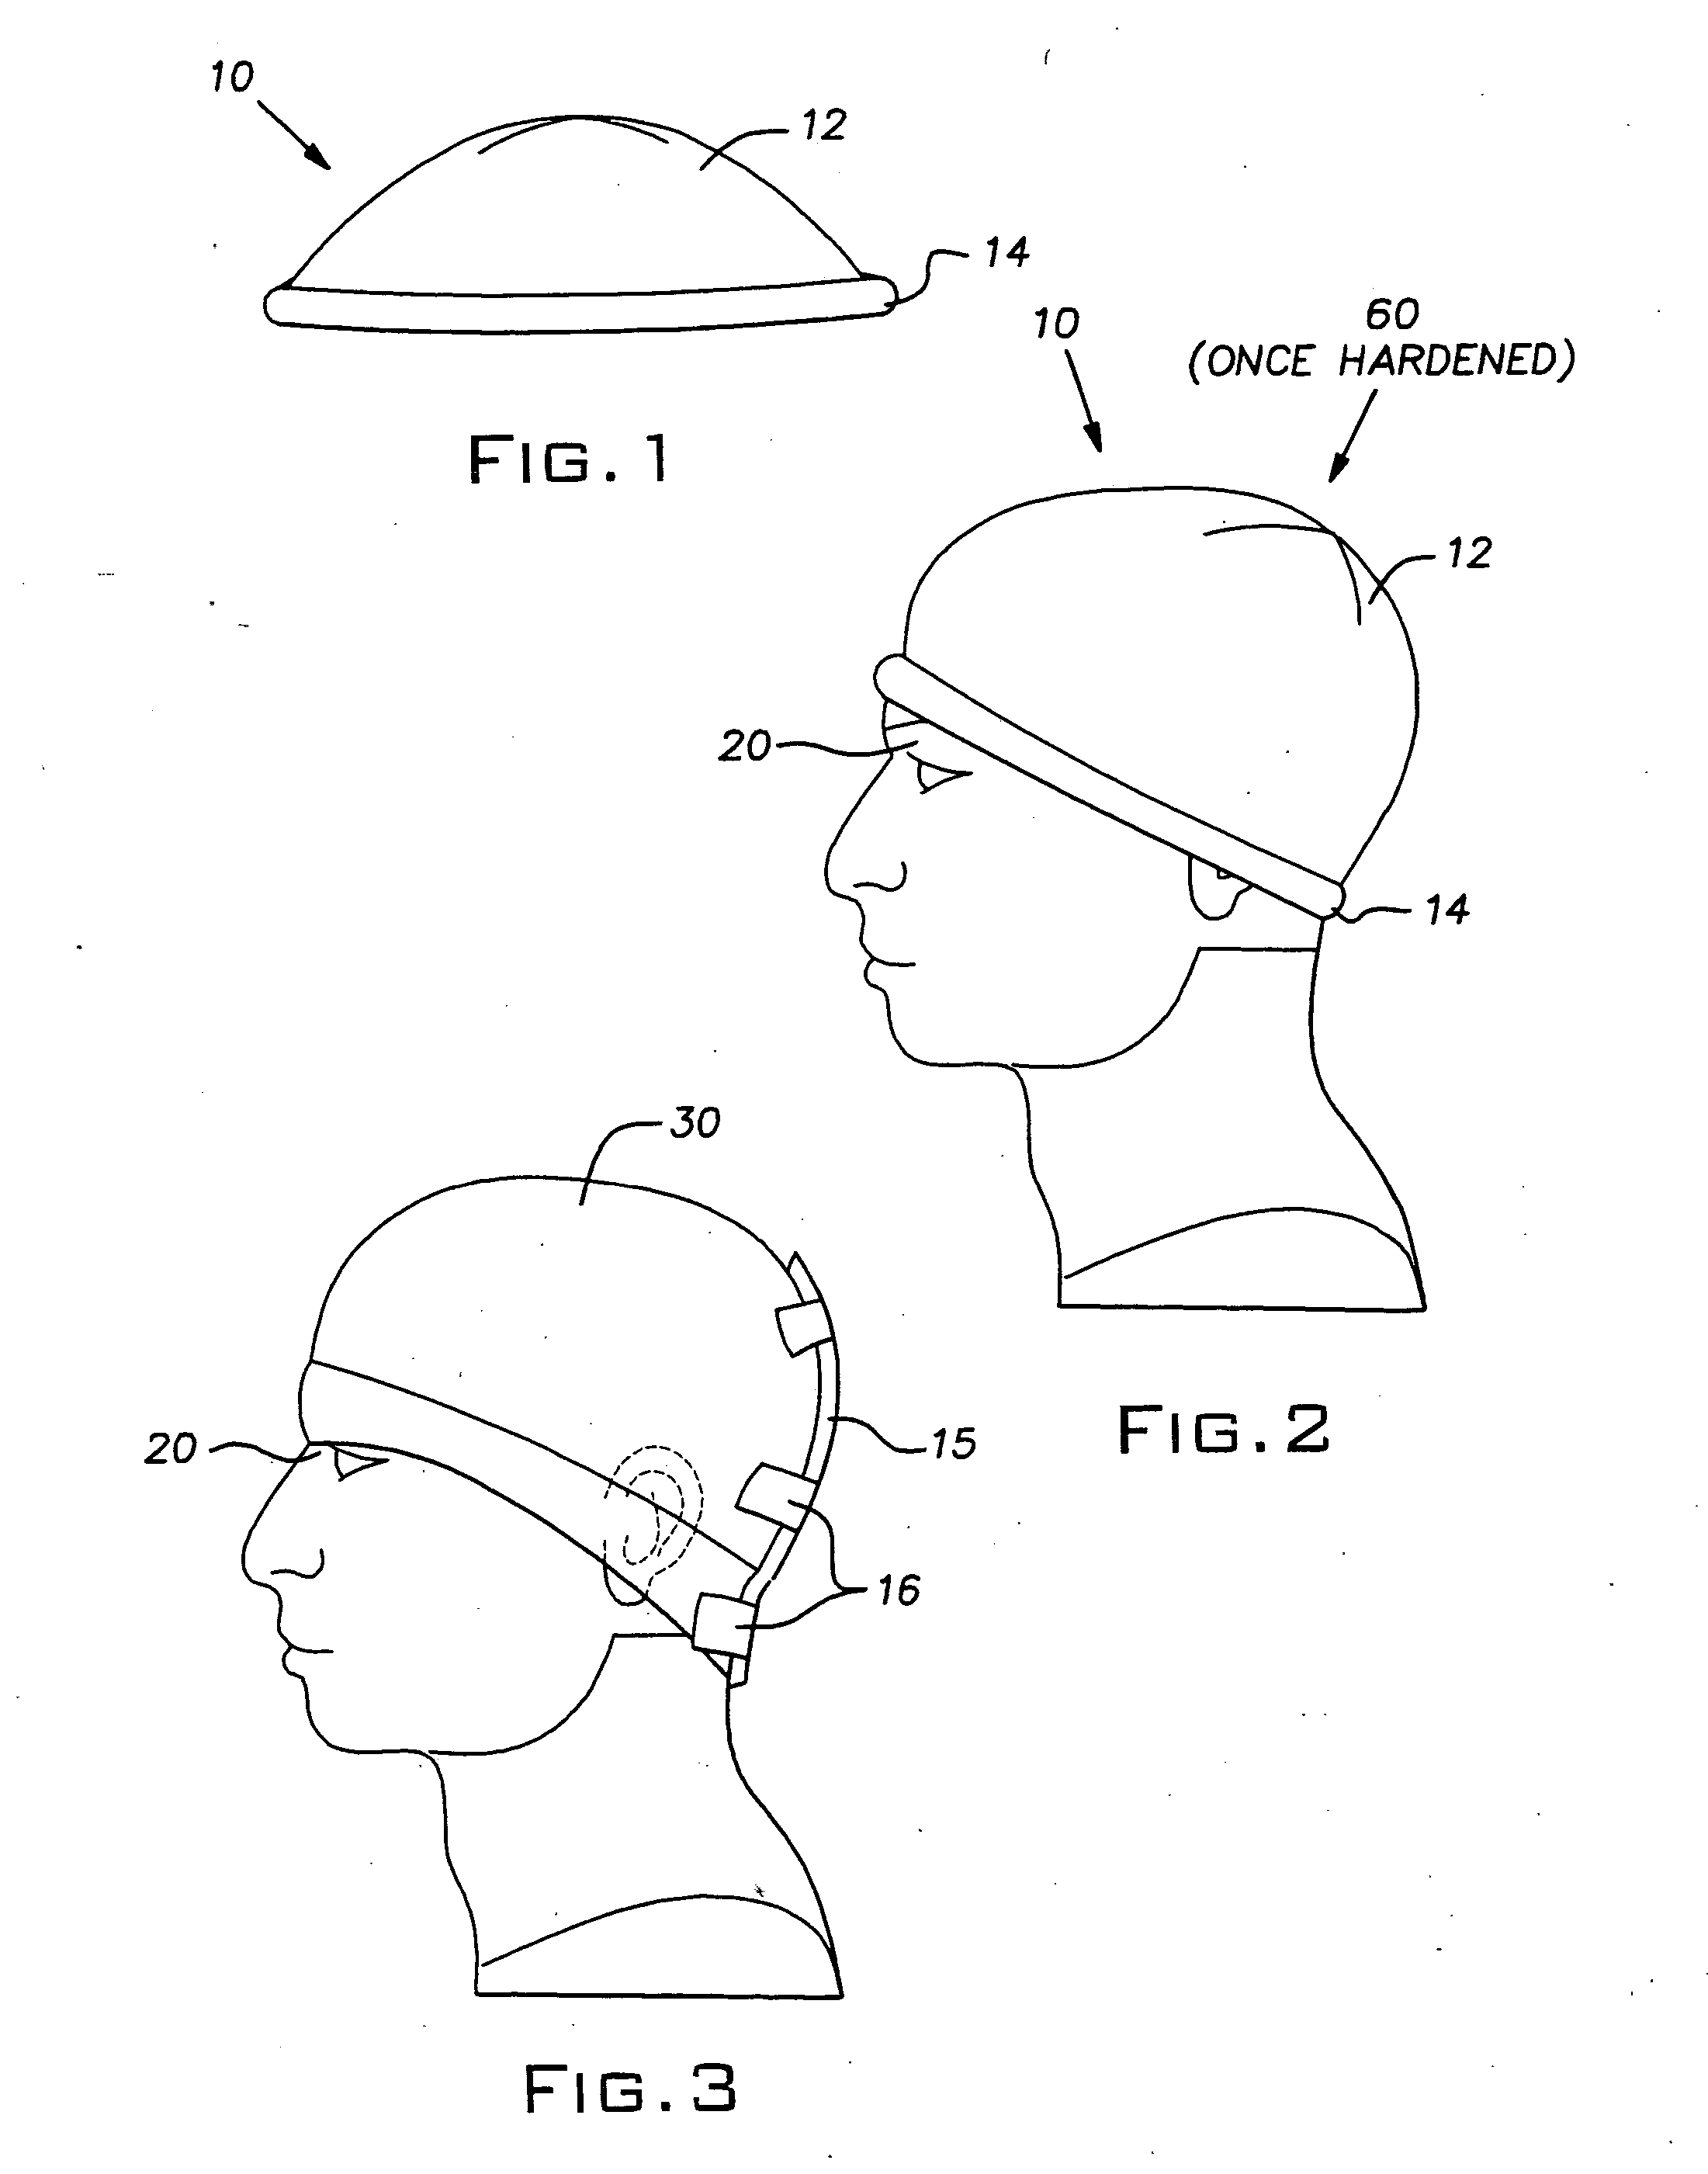 Custom-fitted helmet and method of making the same